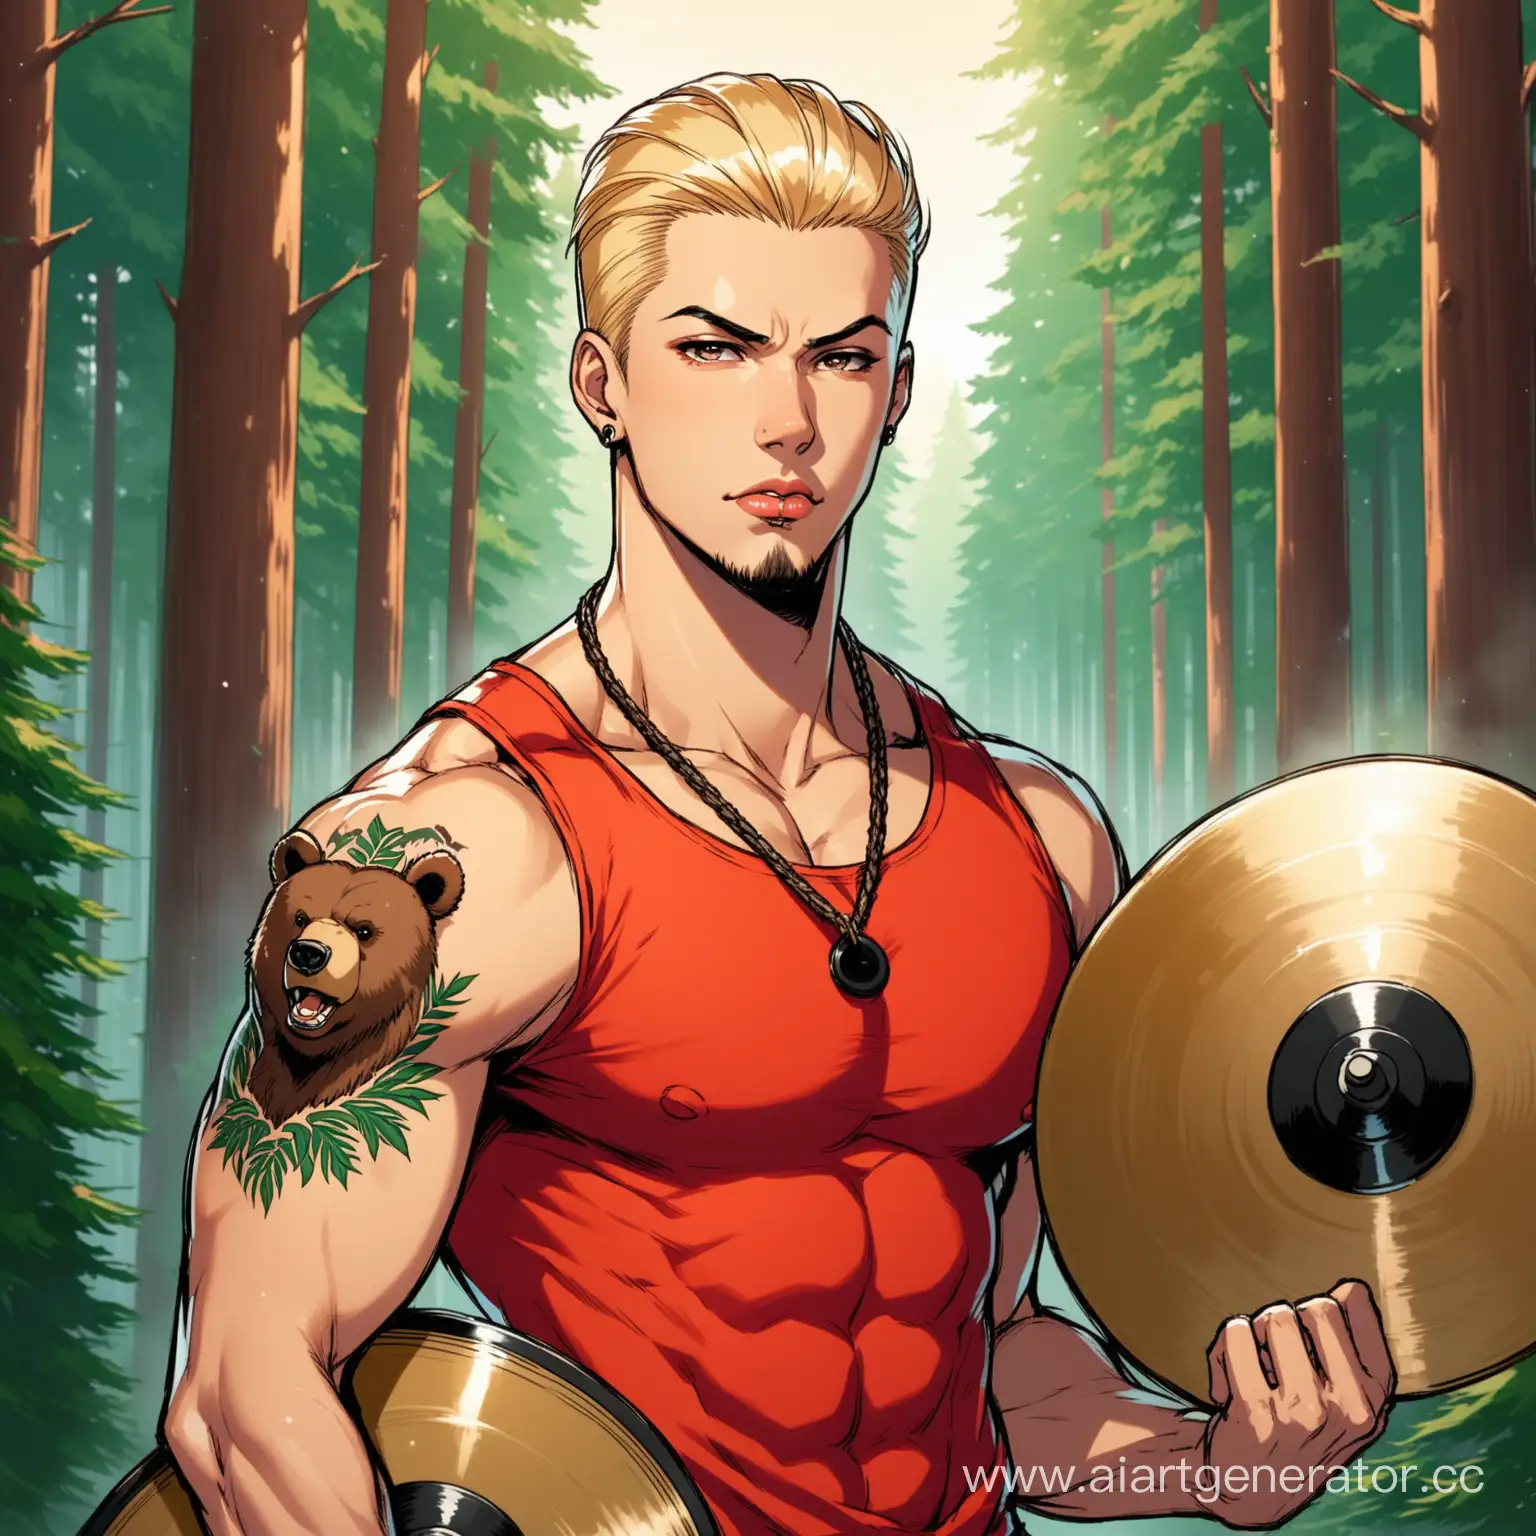 Muscular-Blonde-Youth-Playing-Cymbals-in-Forest-Den